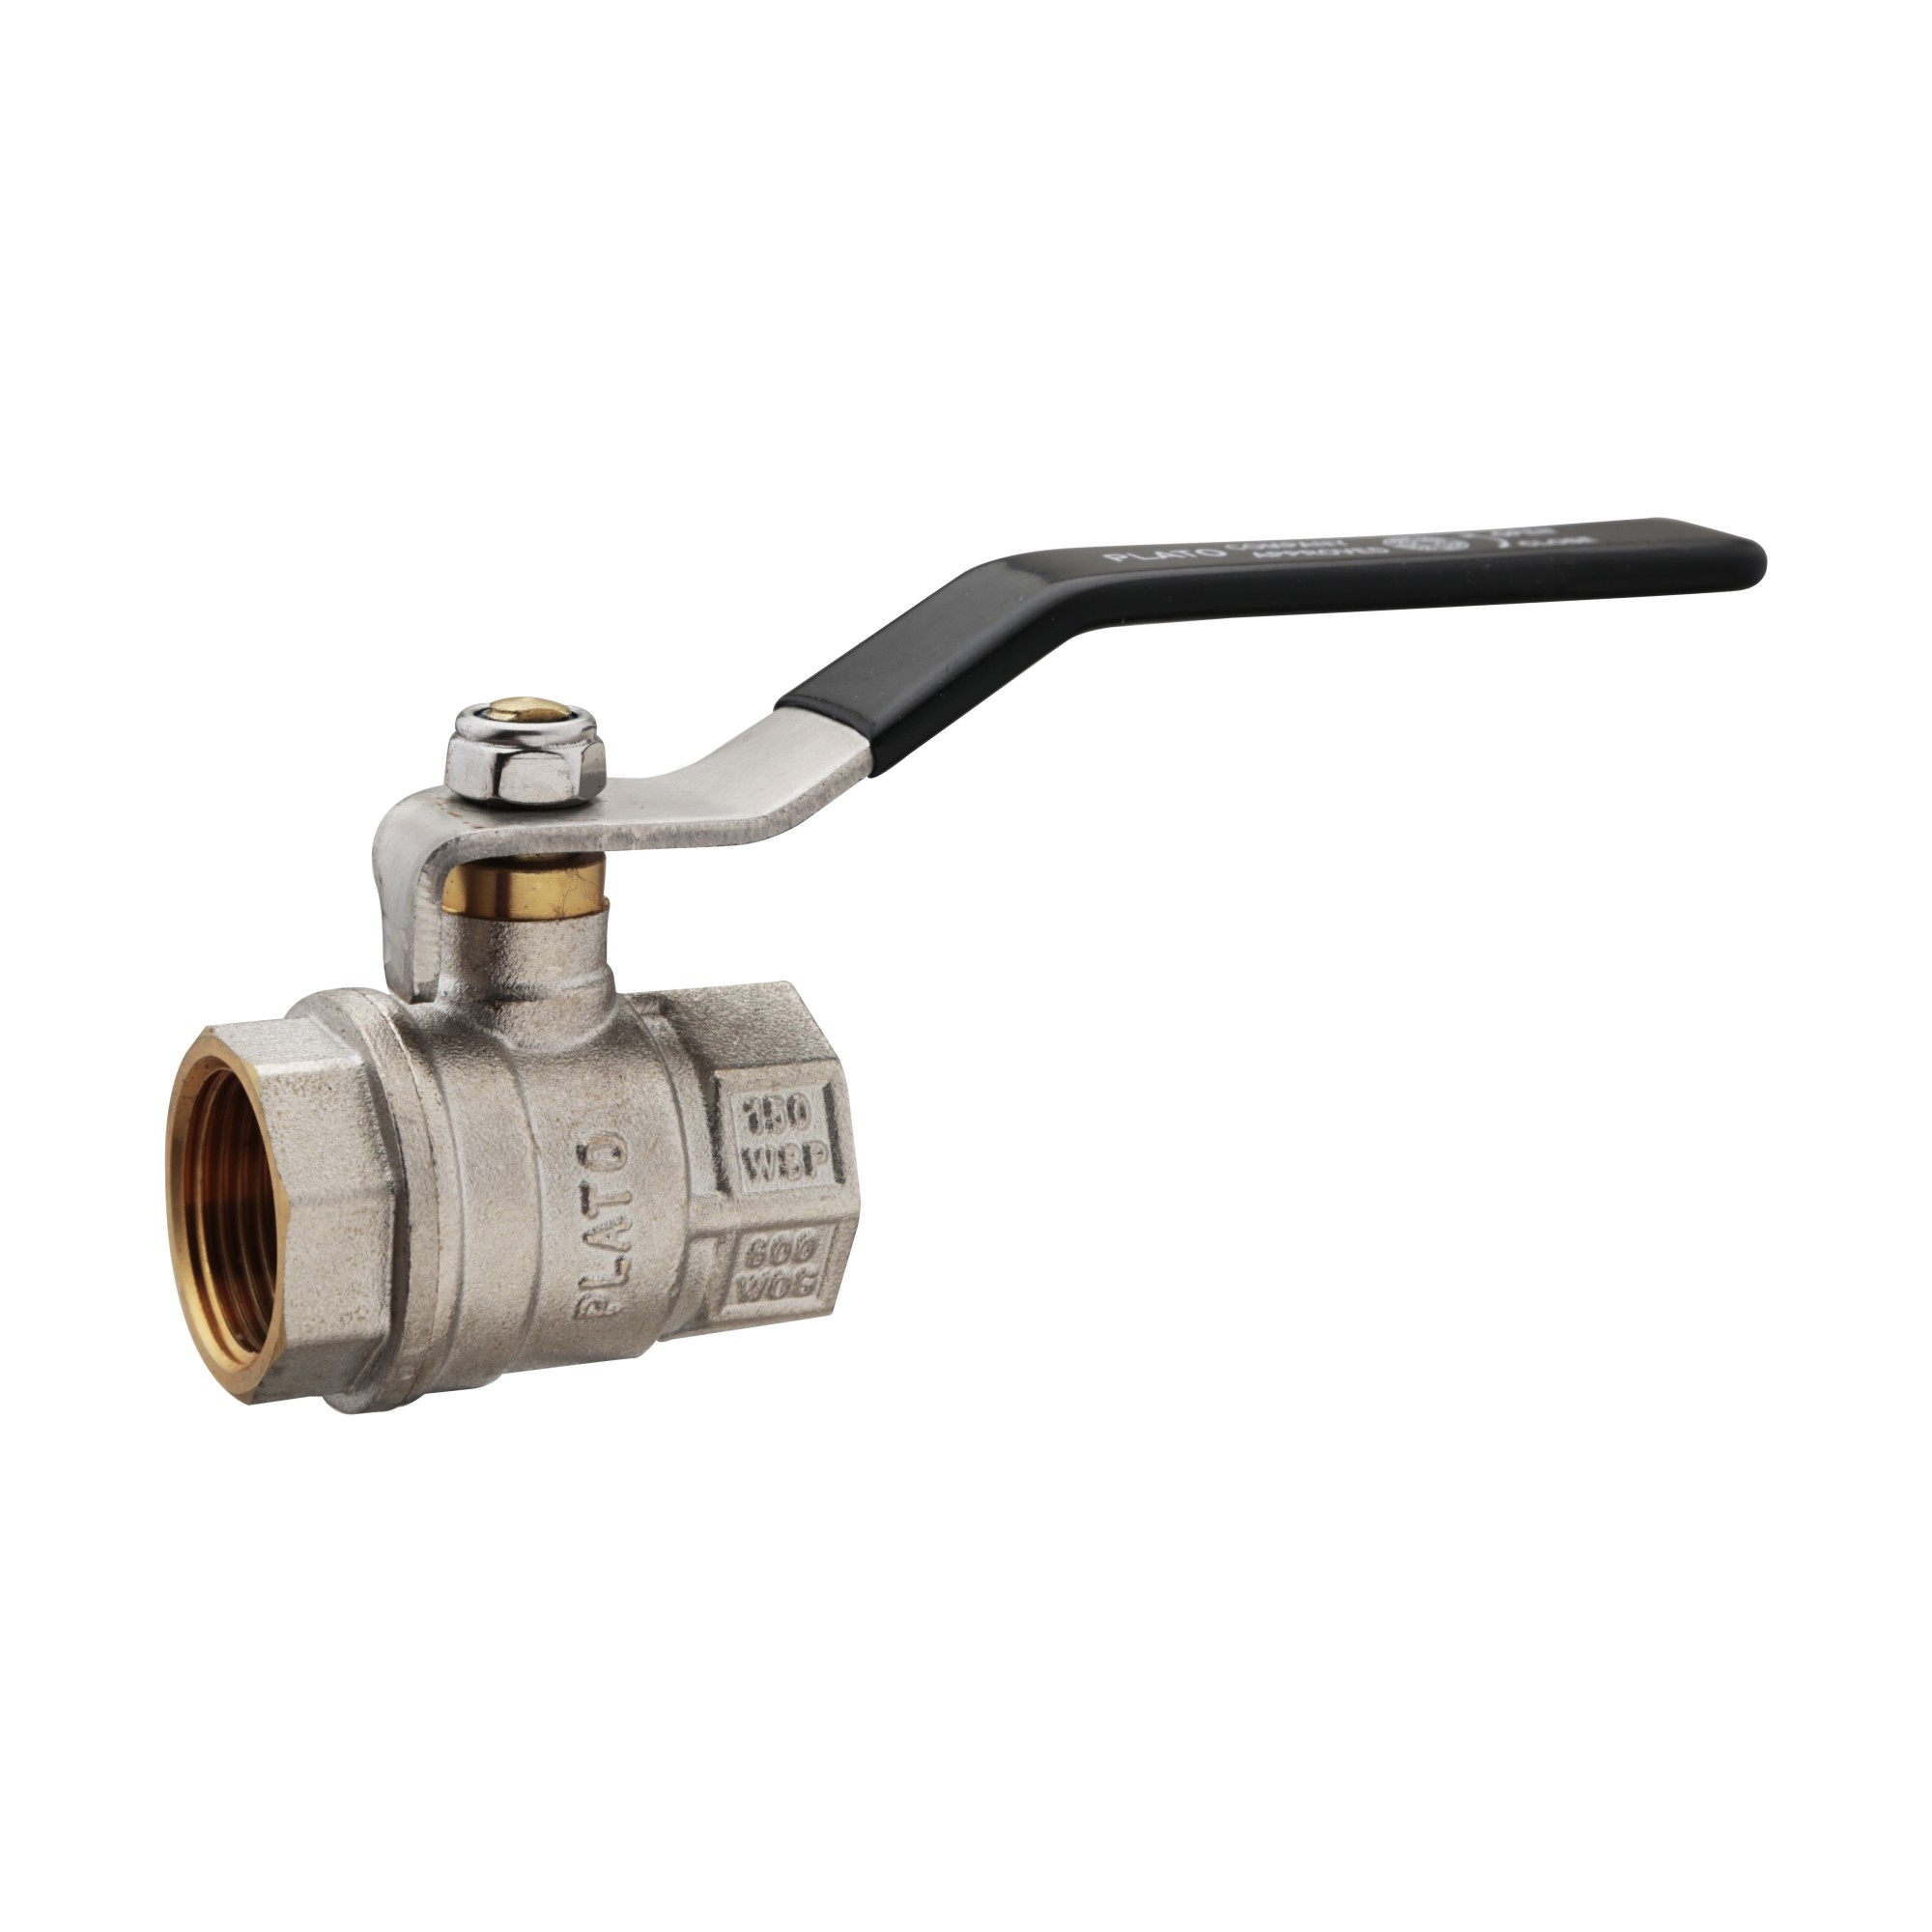 Ball Valve with Stainless Steel Handle